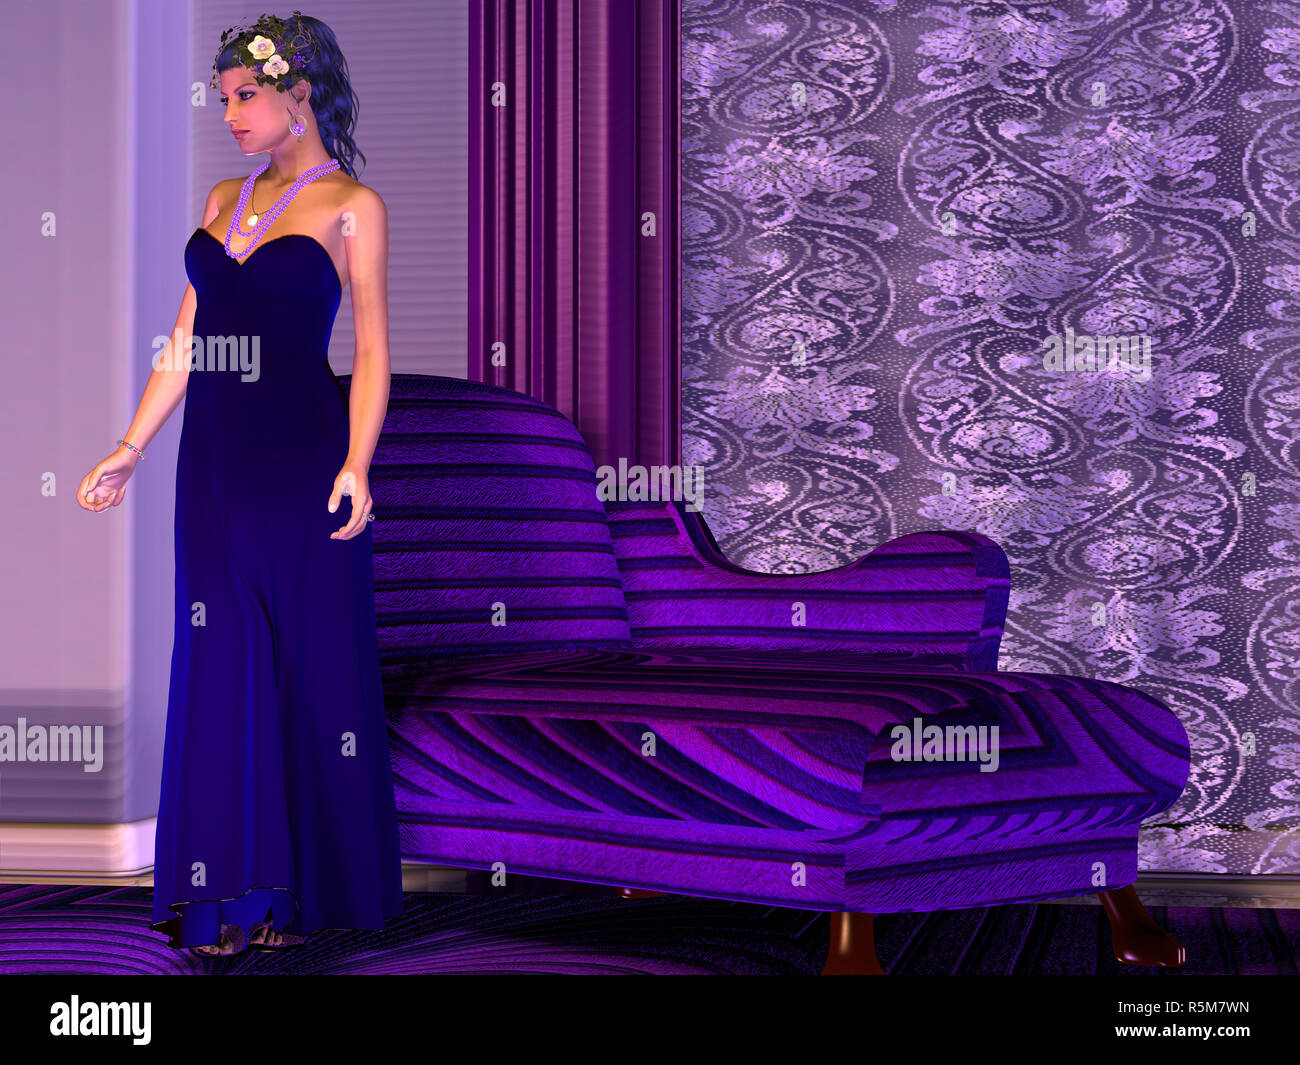 Lady in Lilac Room Stock Photo